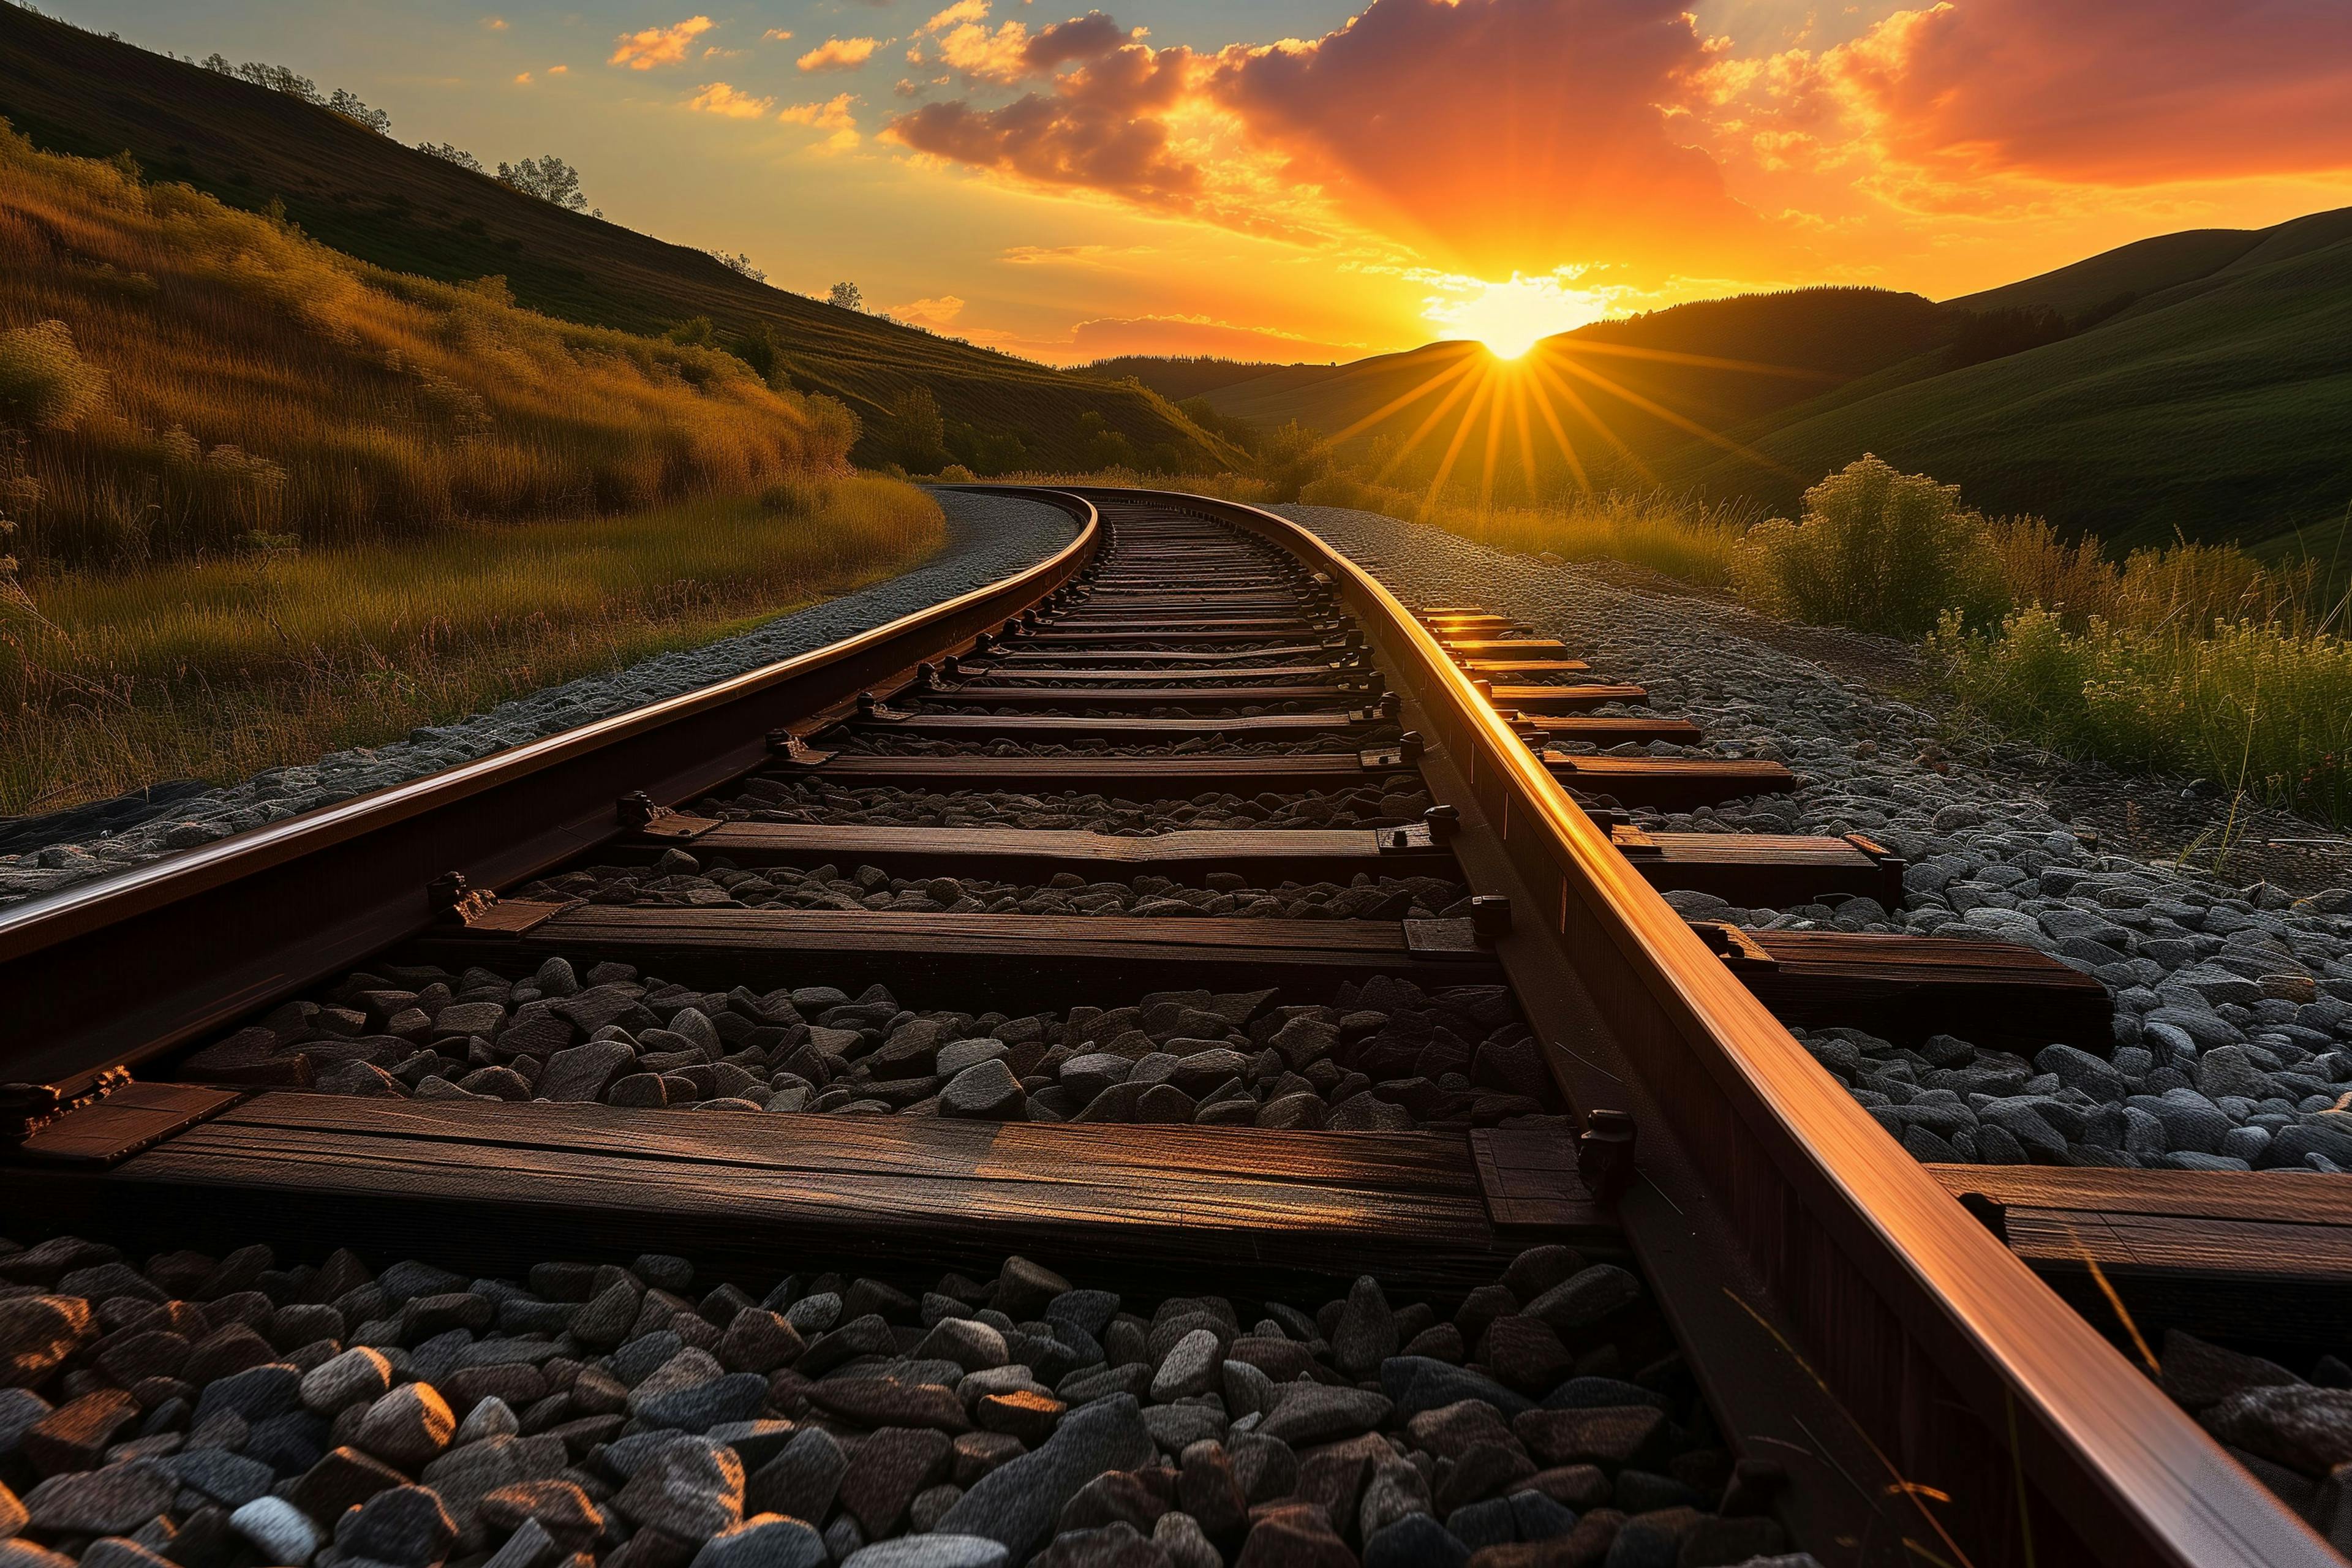 railway rails go into the distance around the bend against the backdrop of a beautiful sunset | Image Credit: © kazakova0684 - stock.adobe.com